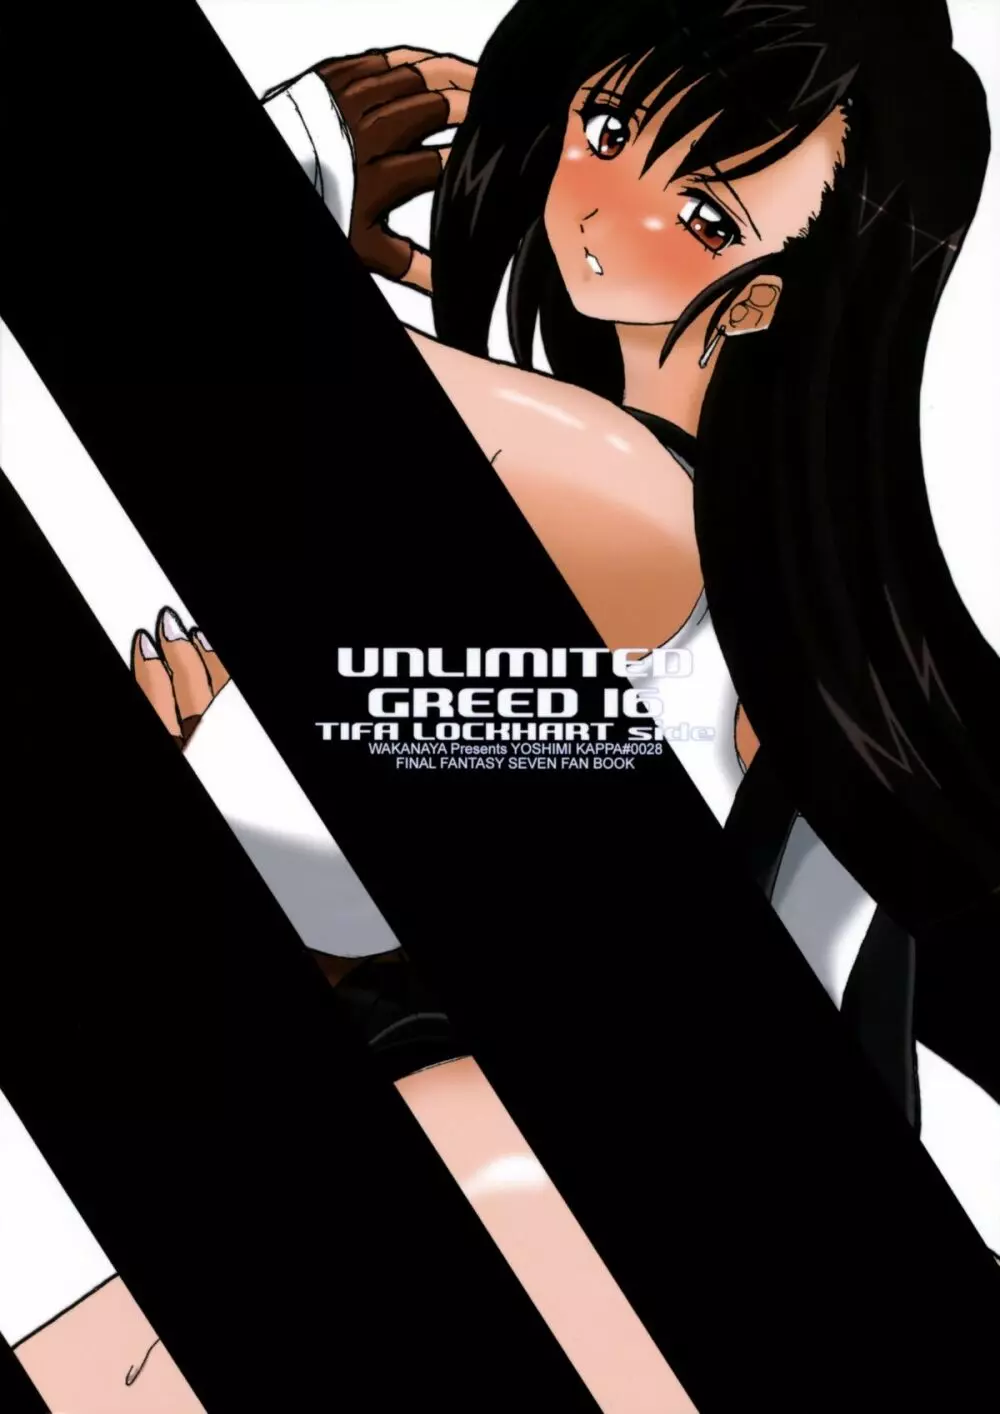 Unlimited Greed 16 Tifa Lockhart Side Page.26